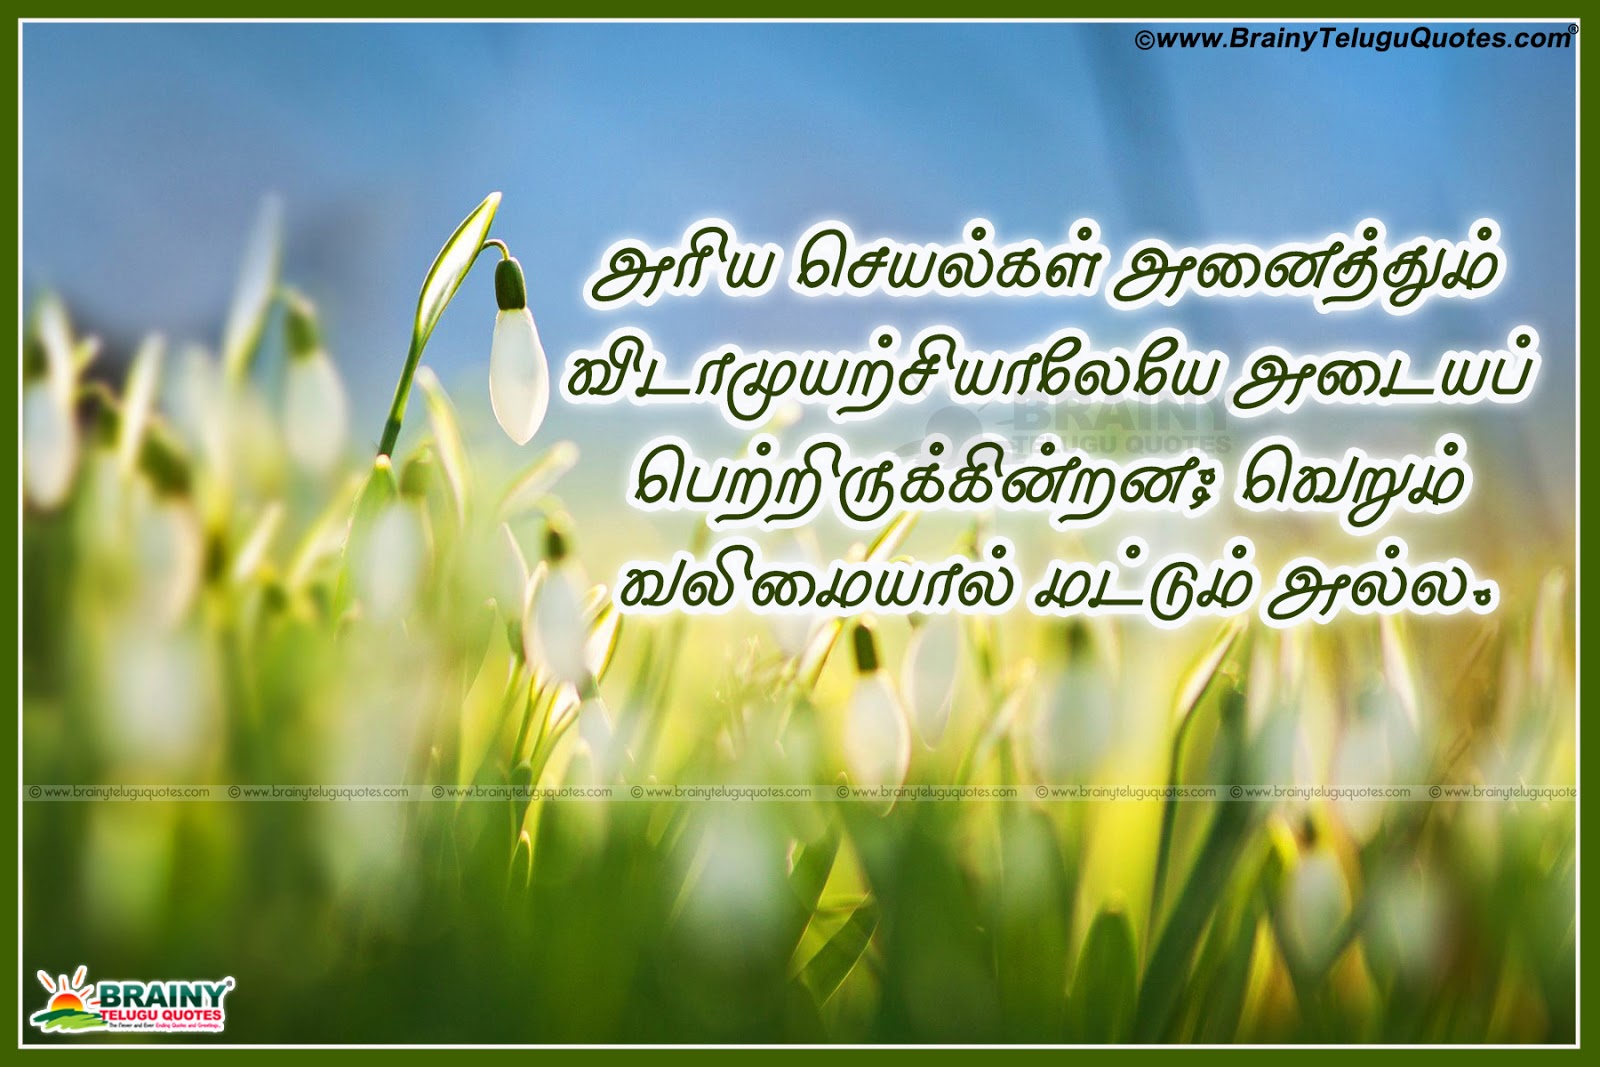 Tamil Life Motivational Thoughts Images Happiness Quotes